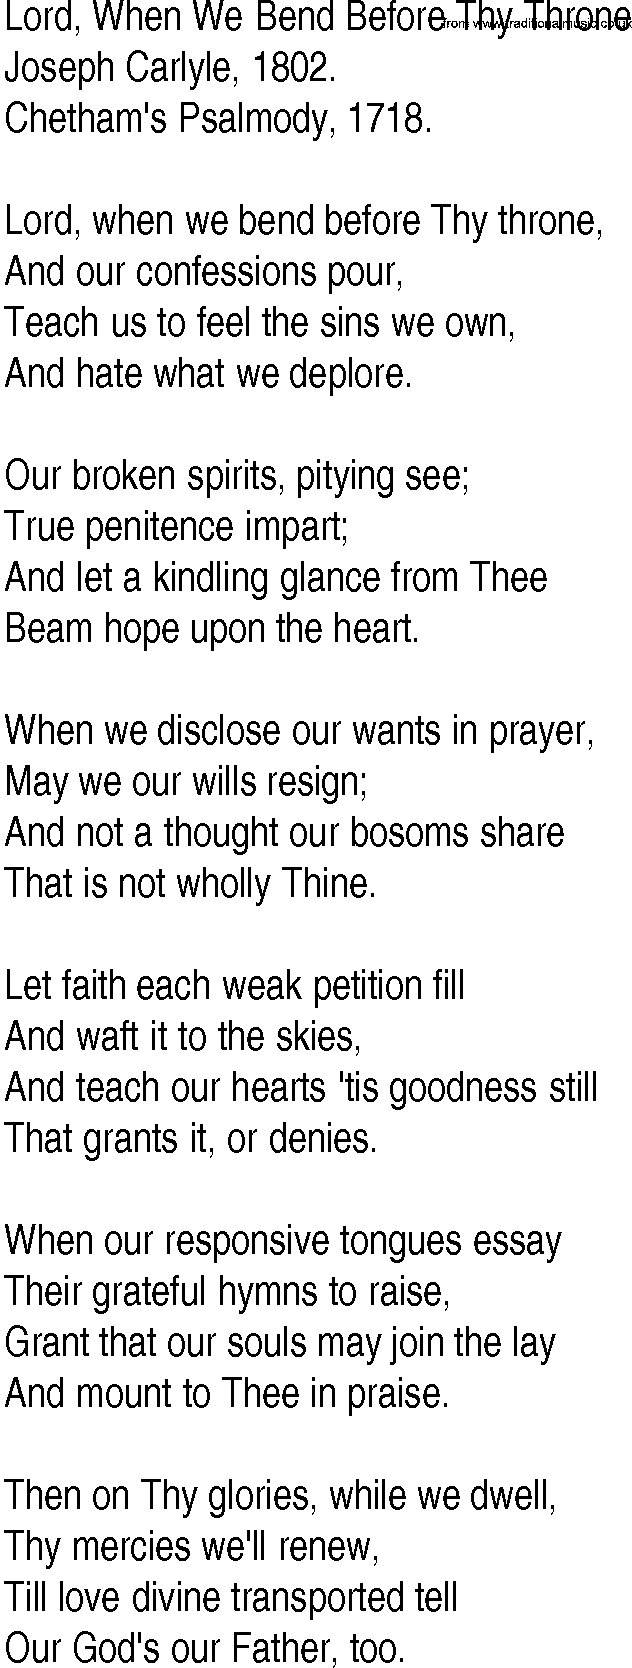 Hymn and Gospel Song: Lord, When We Bend Before Thy Throne by Joseph Carlyle lyrics